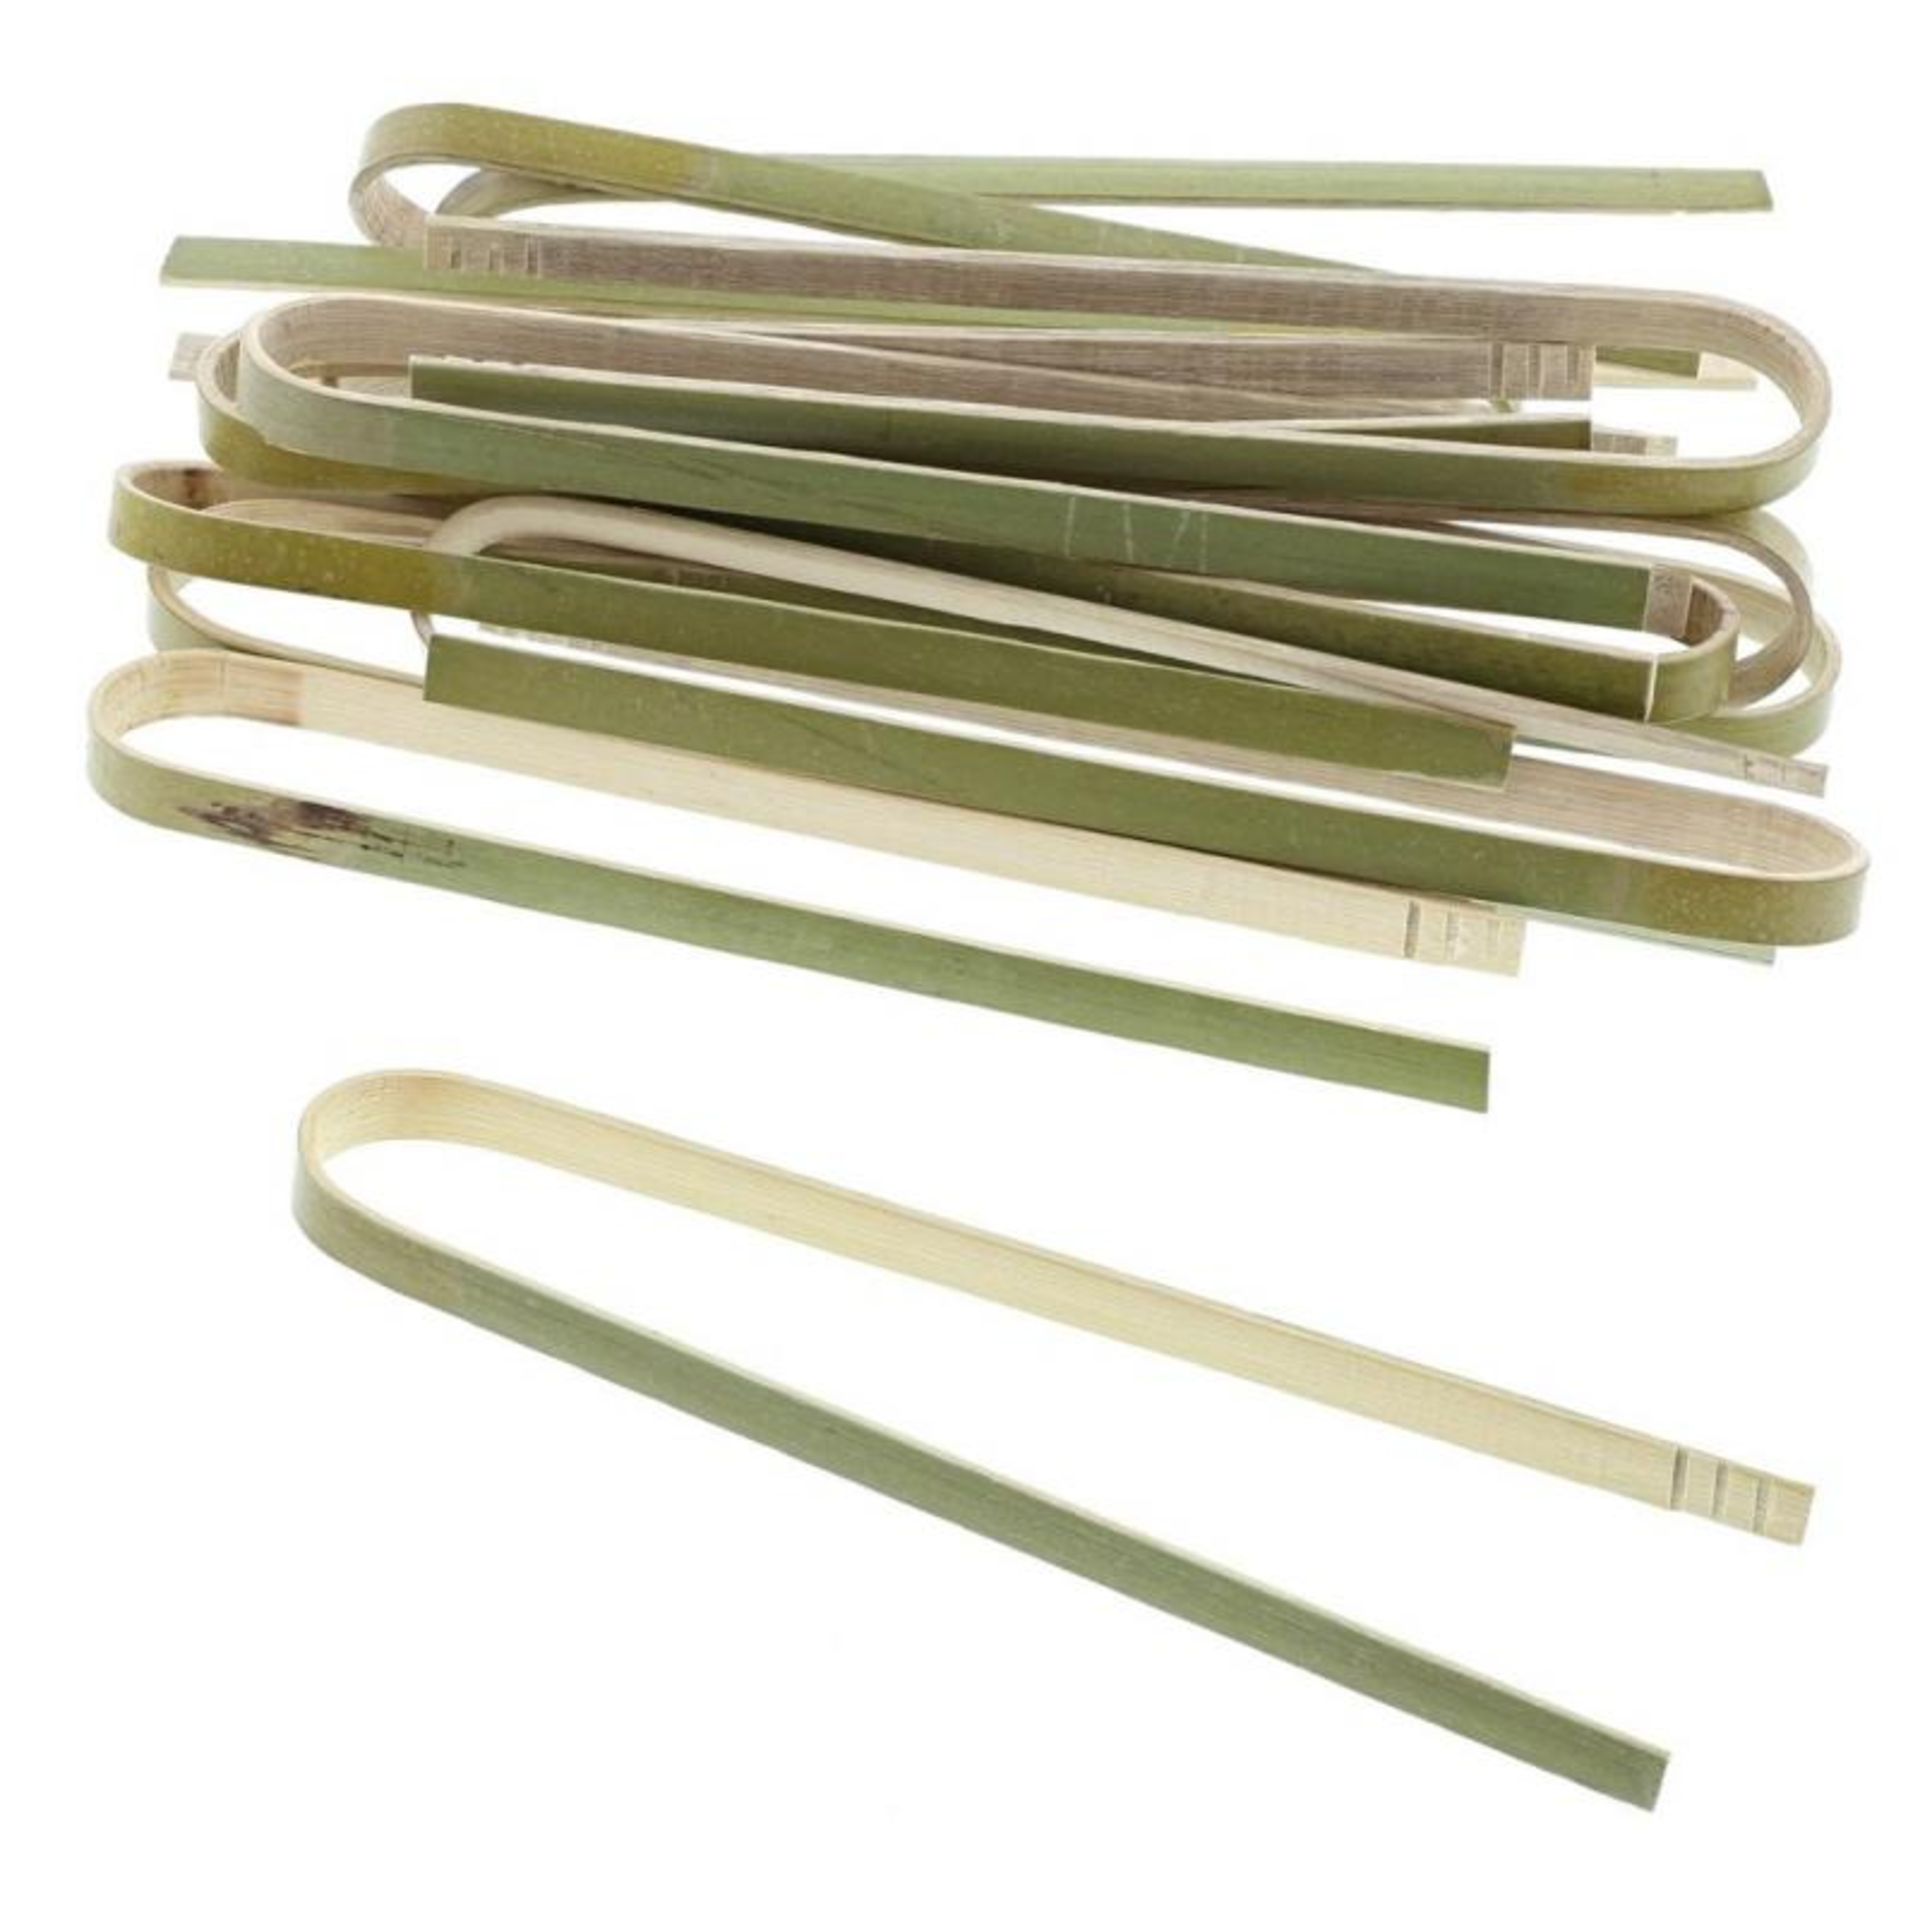 700 x 6" Disposable Bamboo Tongs For Food Preperation - Includes 7 x 100 - New and Unused Stock